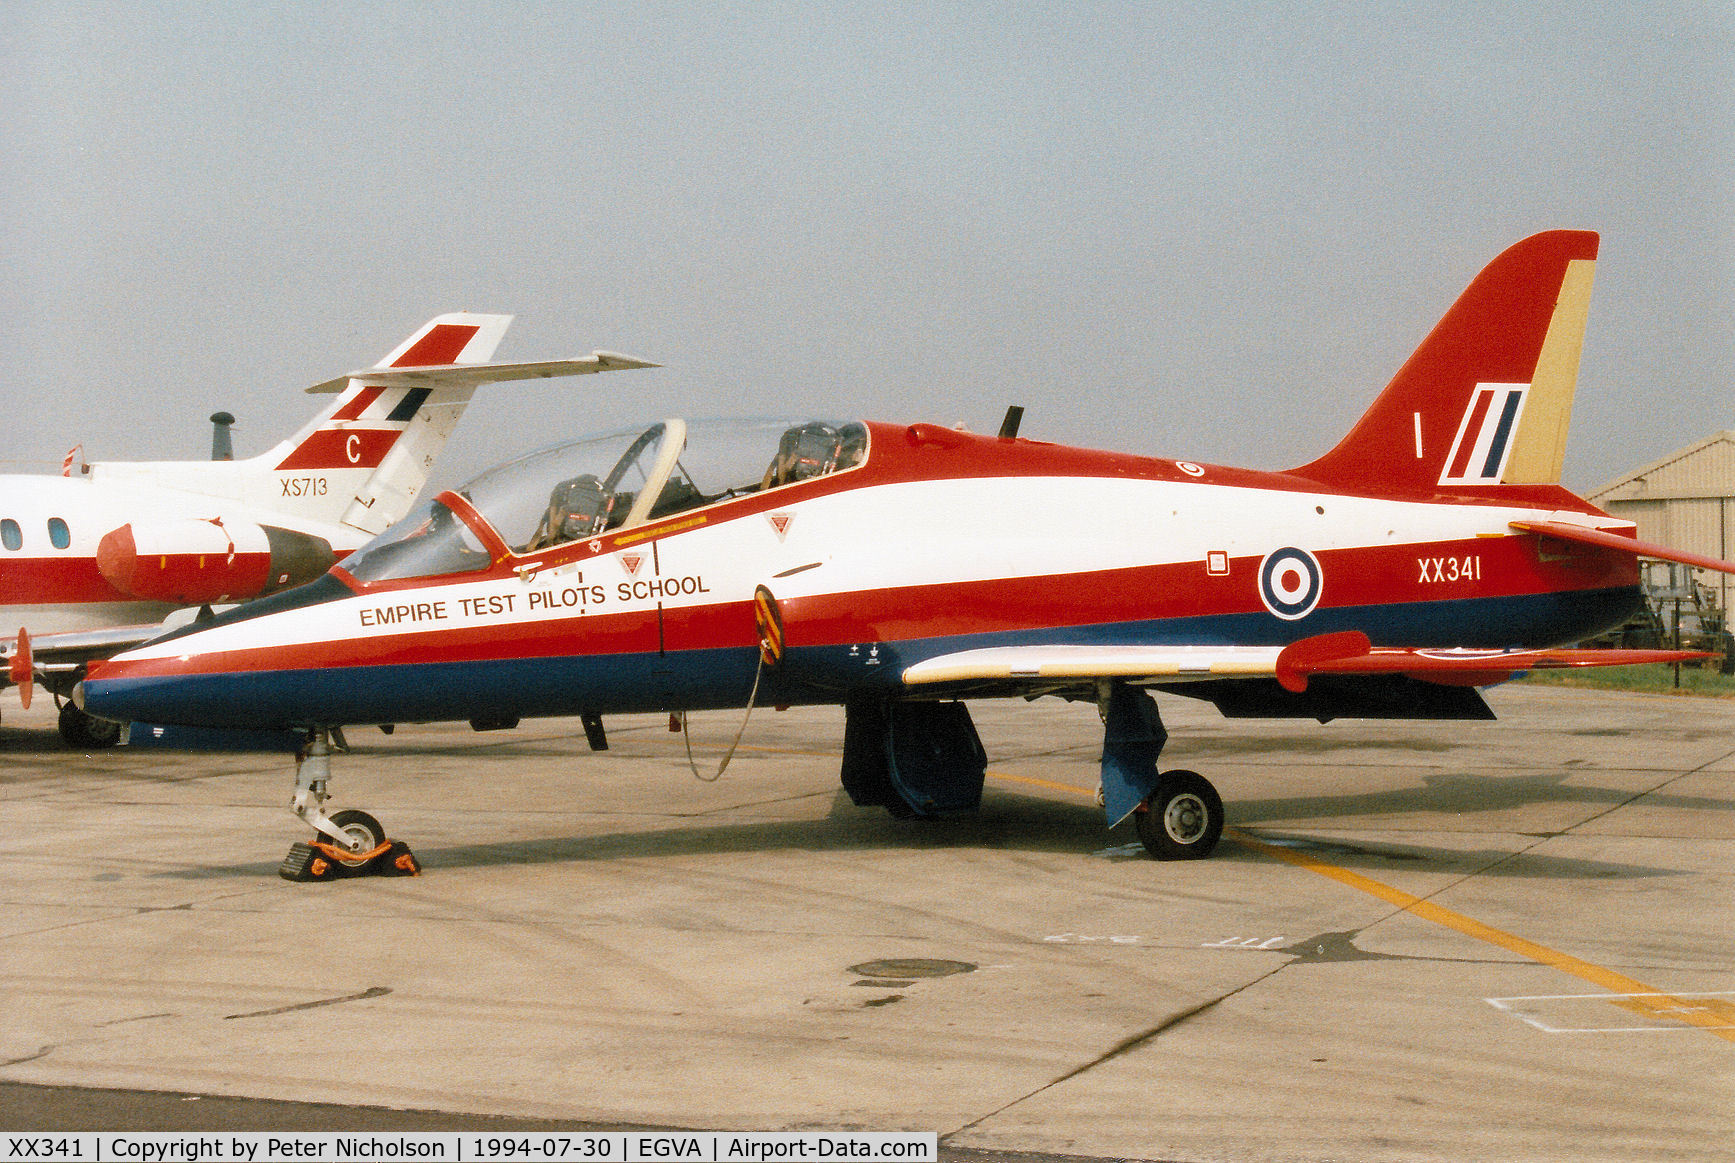 XX341, 1980 Hawker Siddeley Hawk T.1 C/N 190/312165, Hawk T.1 ASTRA of the Empire Test Pilots School at Boscombe Down on display at the 1994 Intnl Air Tattoo at RAF Fairford.